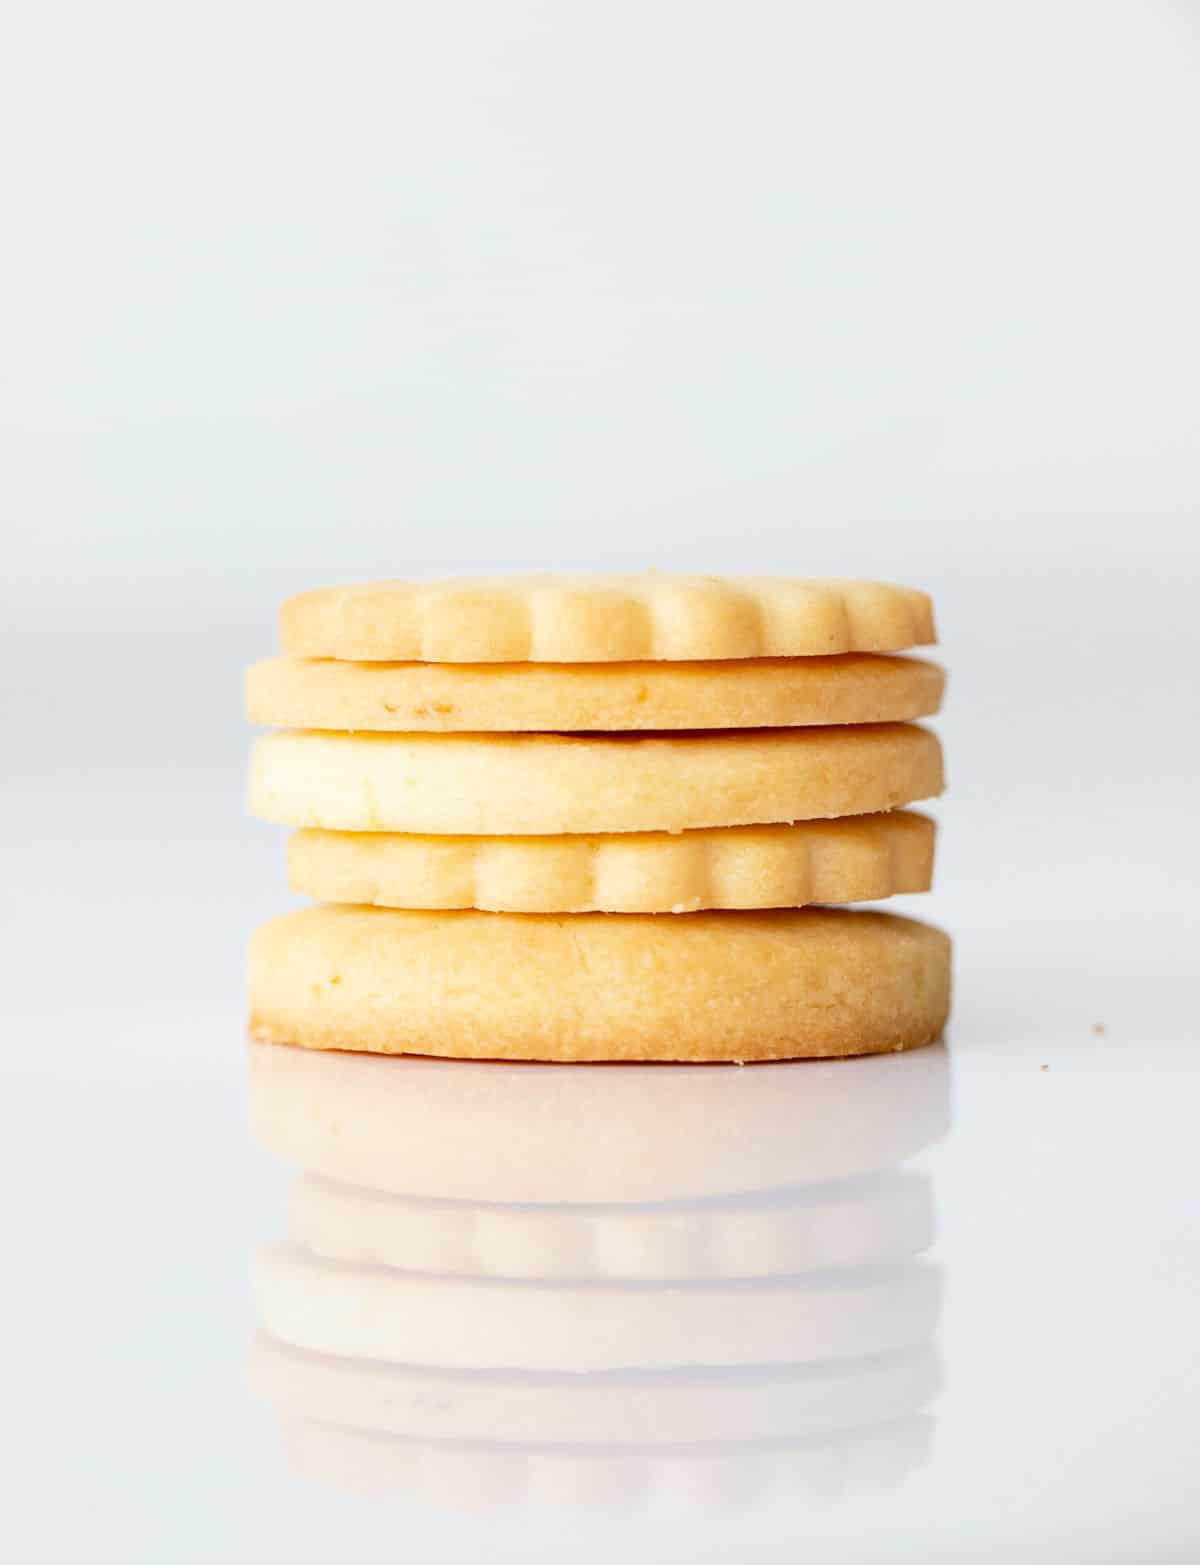 Several round cookies stacked with white marble surface and white background.